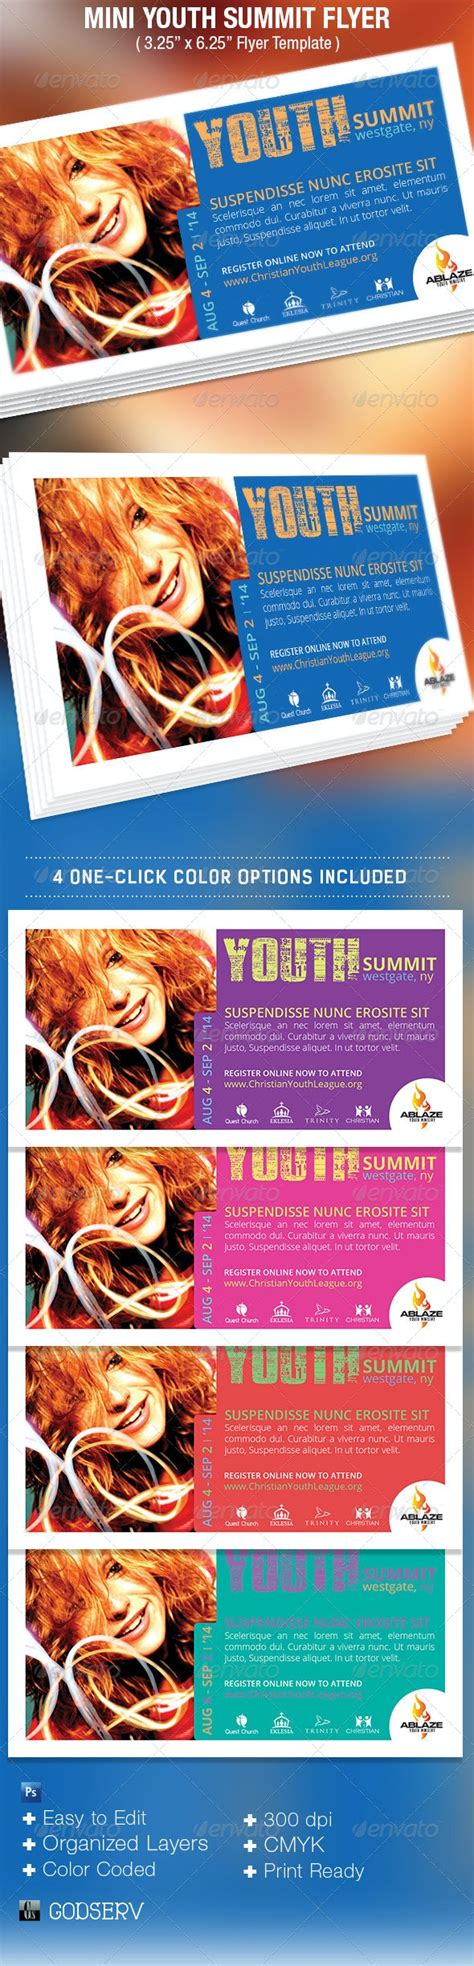 mini youth summit flyer template by godserv graphicriver